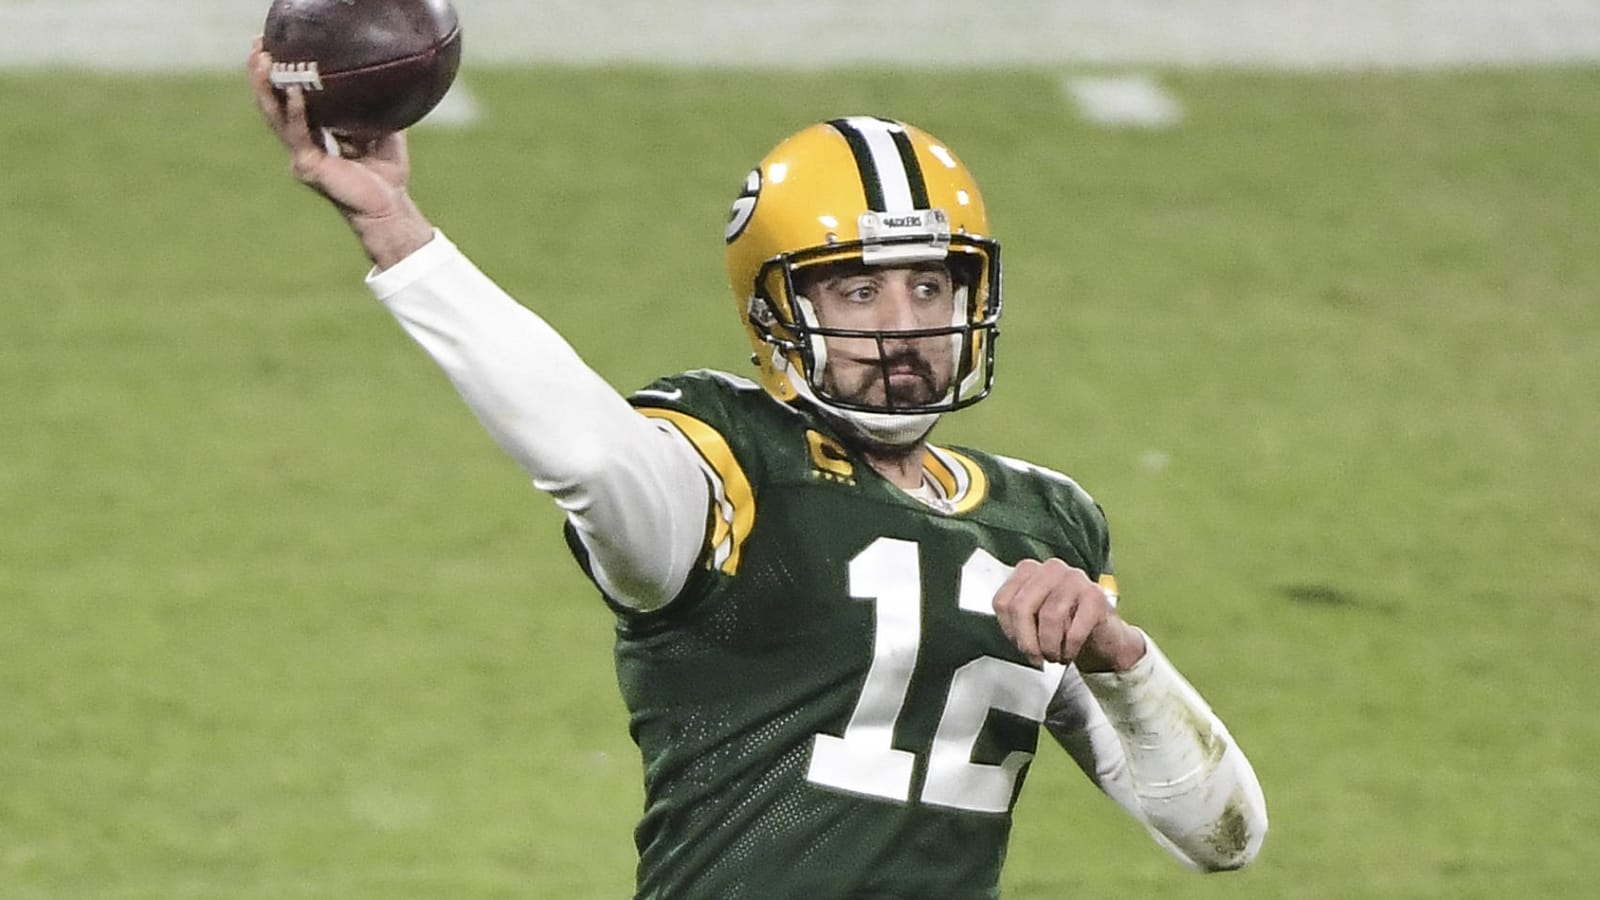 Packers prez: Aaron Rodgers situation has divided fan base